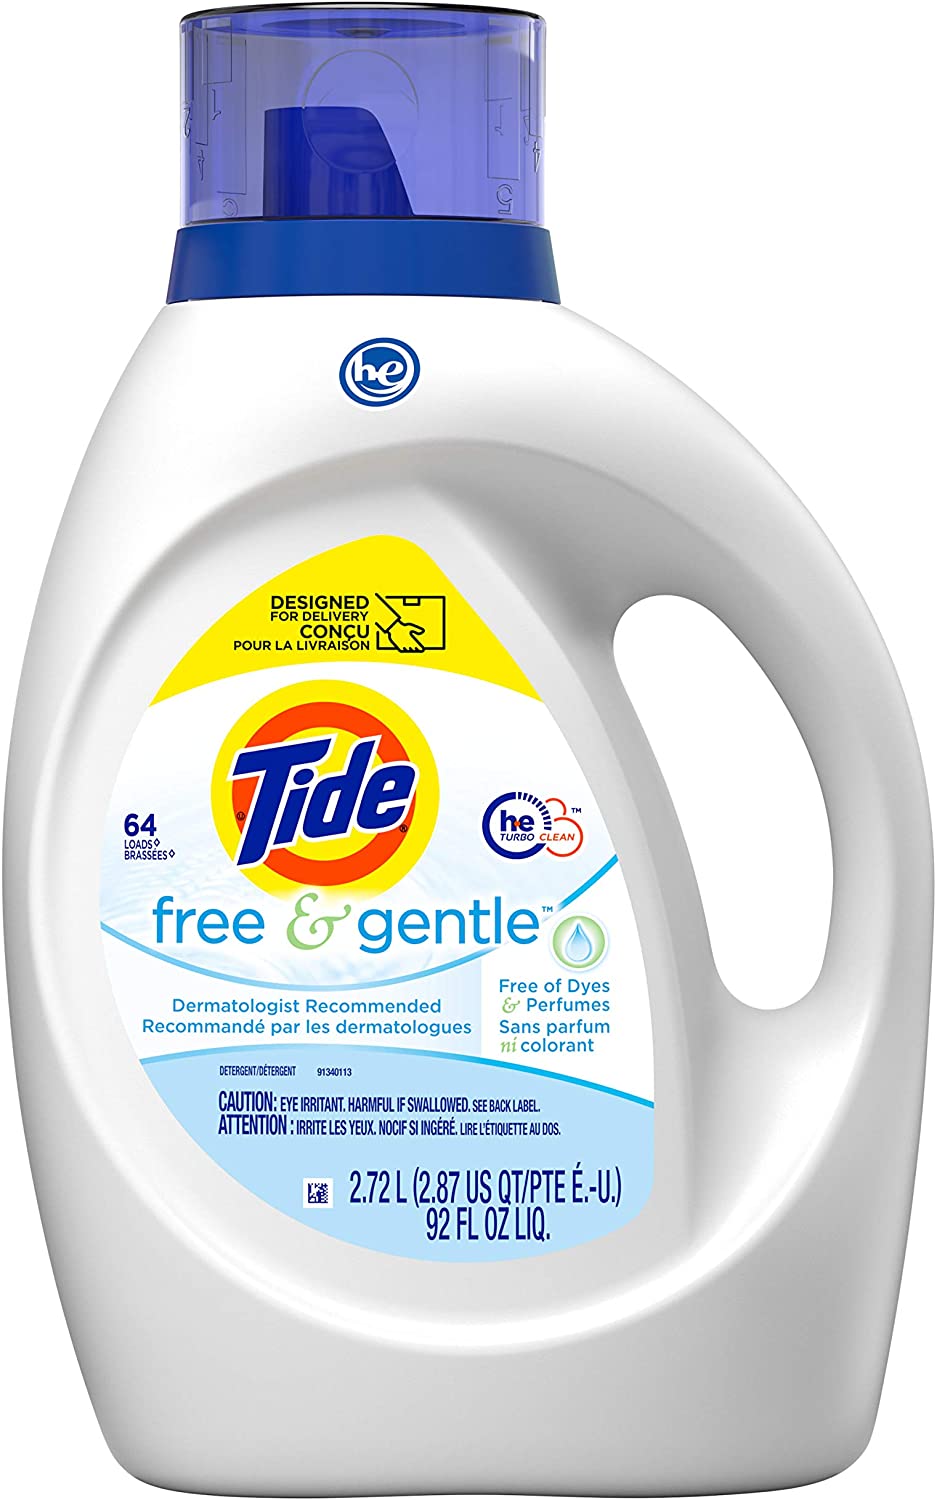 tide-vs-gain-who-makes-the-best-laundry-detergent